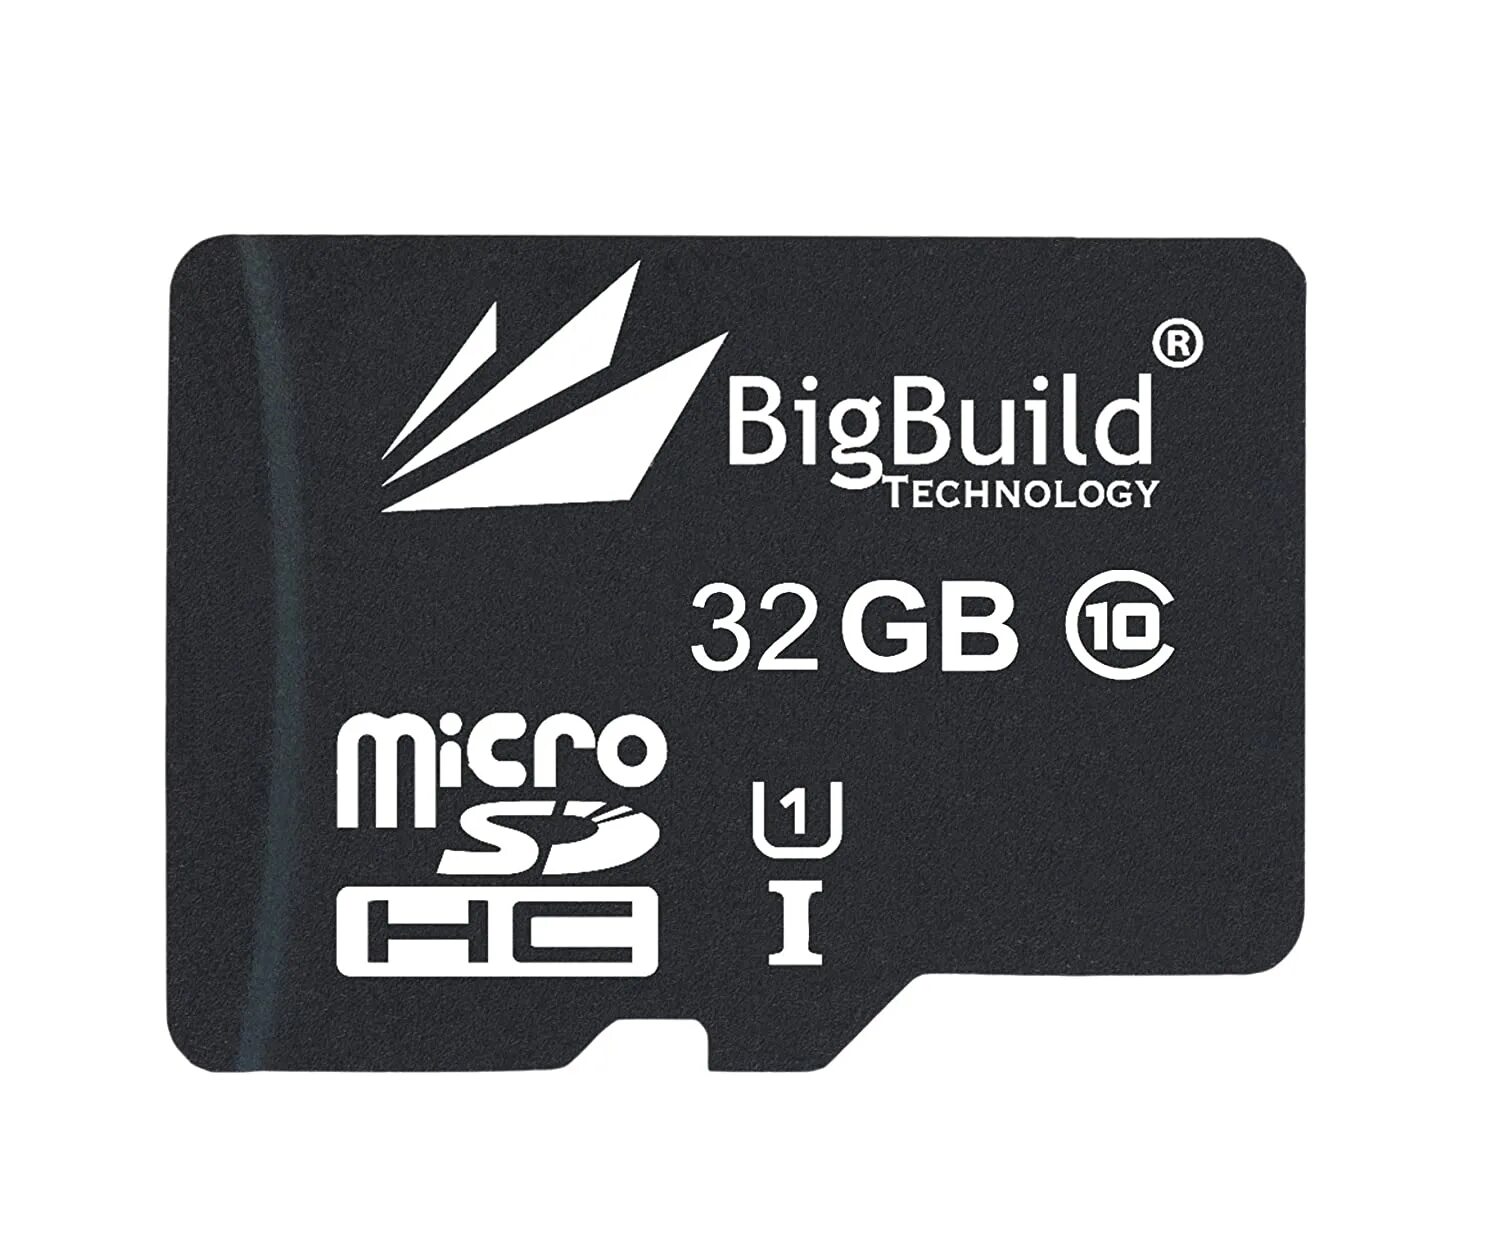 32 GB SD Card PNG. MICROSD Card 32 GB вектор. SD Card (secure Digital Card). Флешка микро СД PNG.